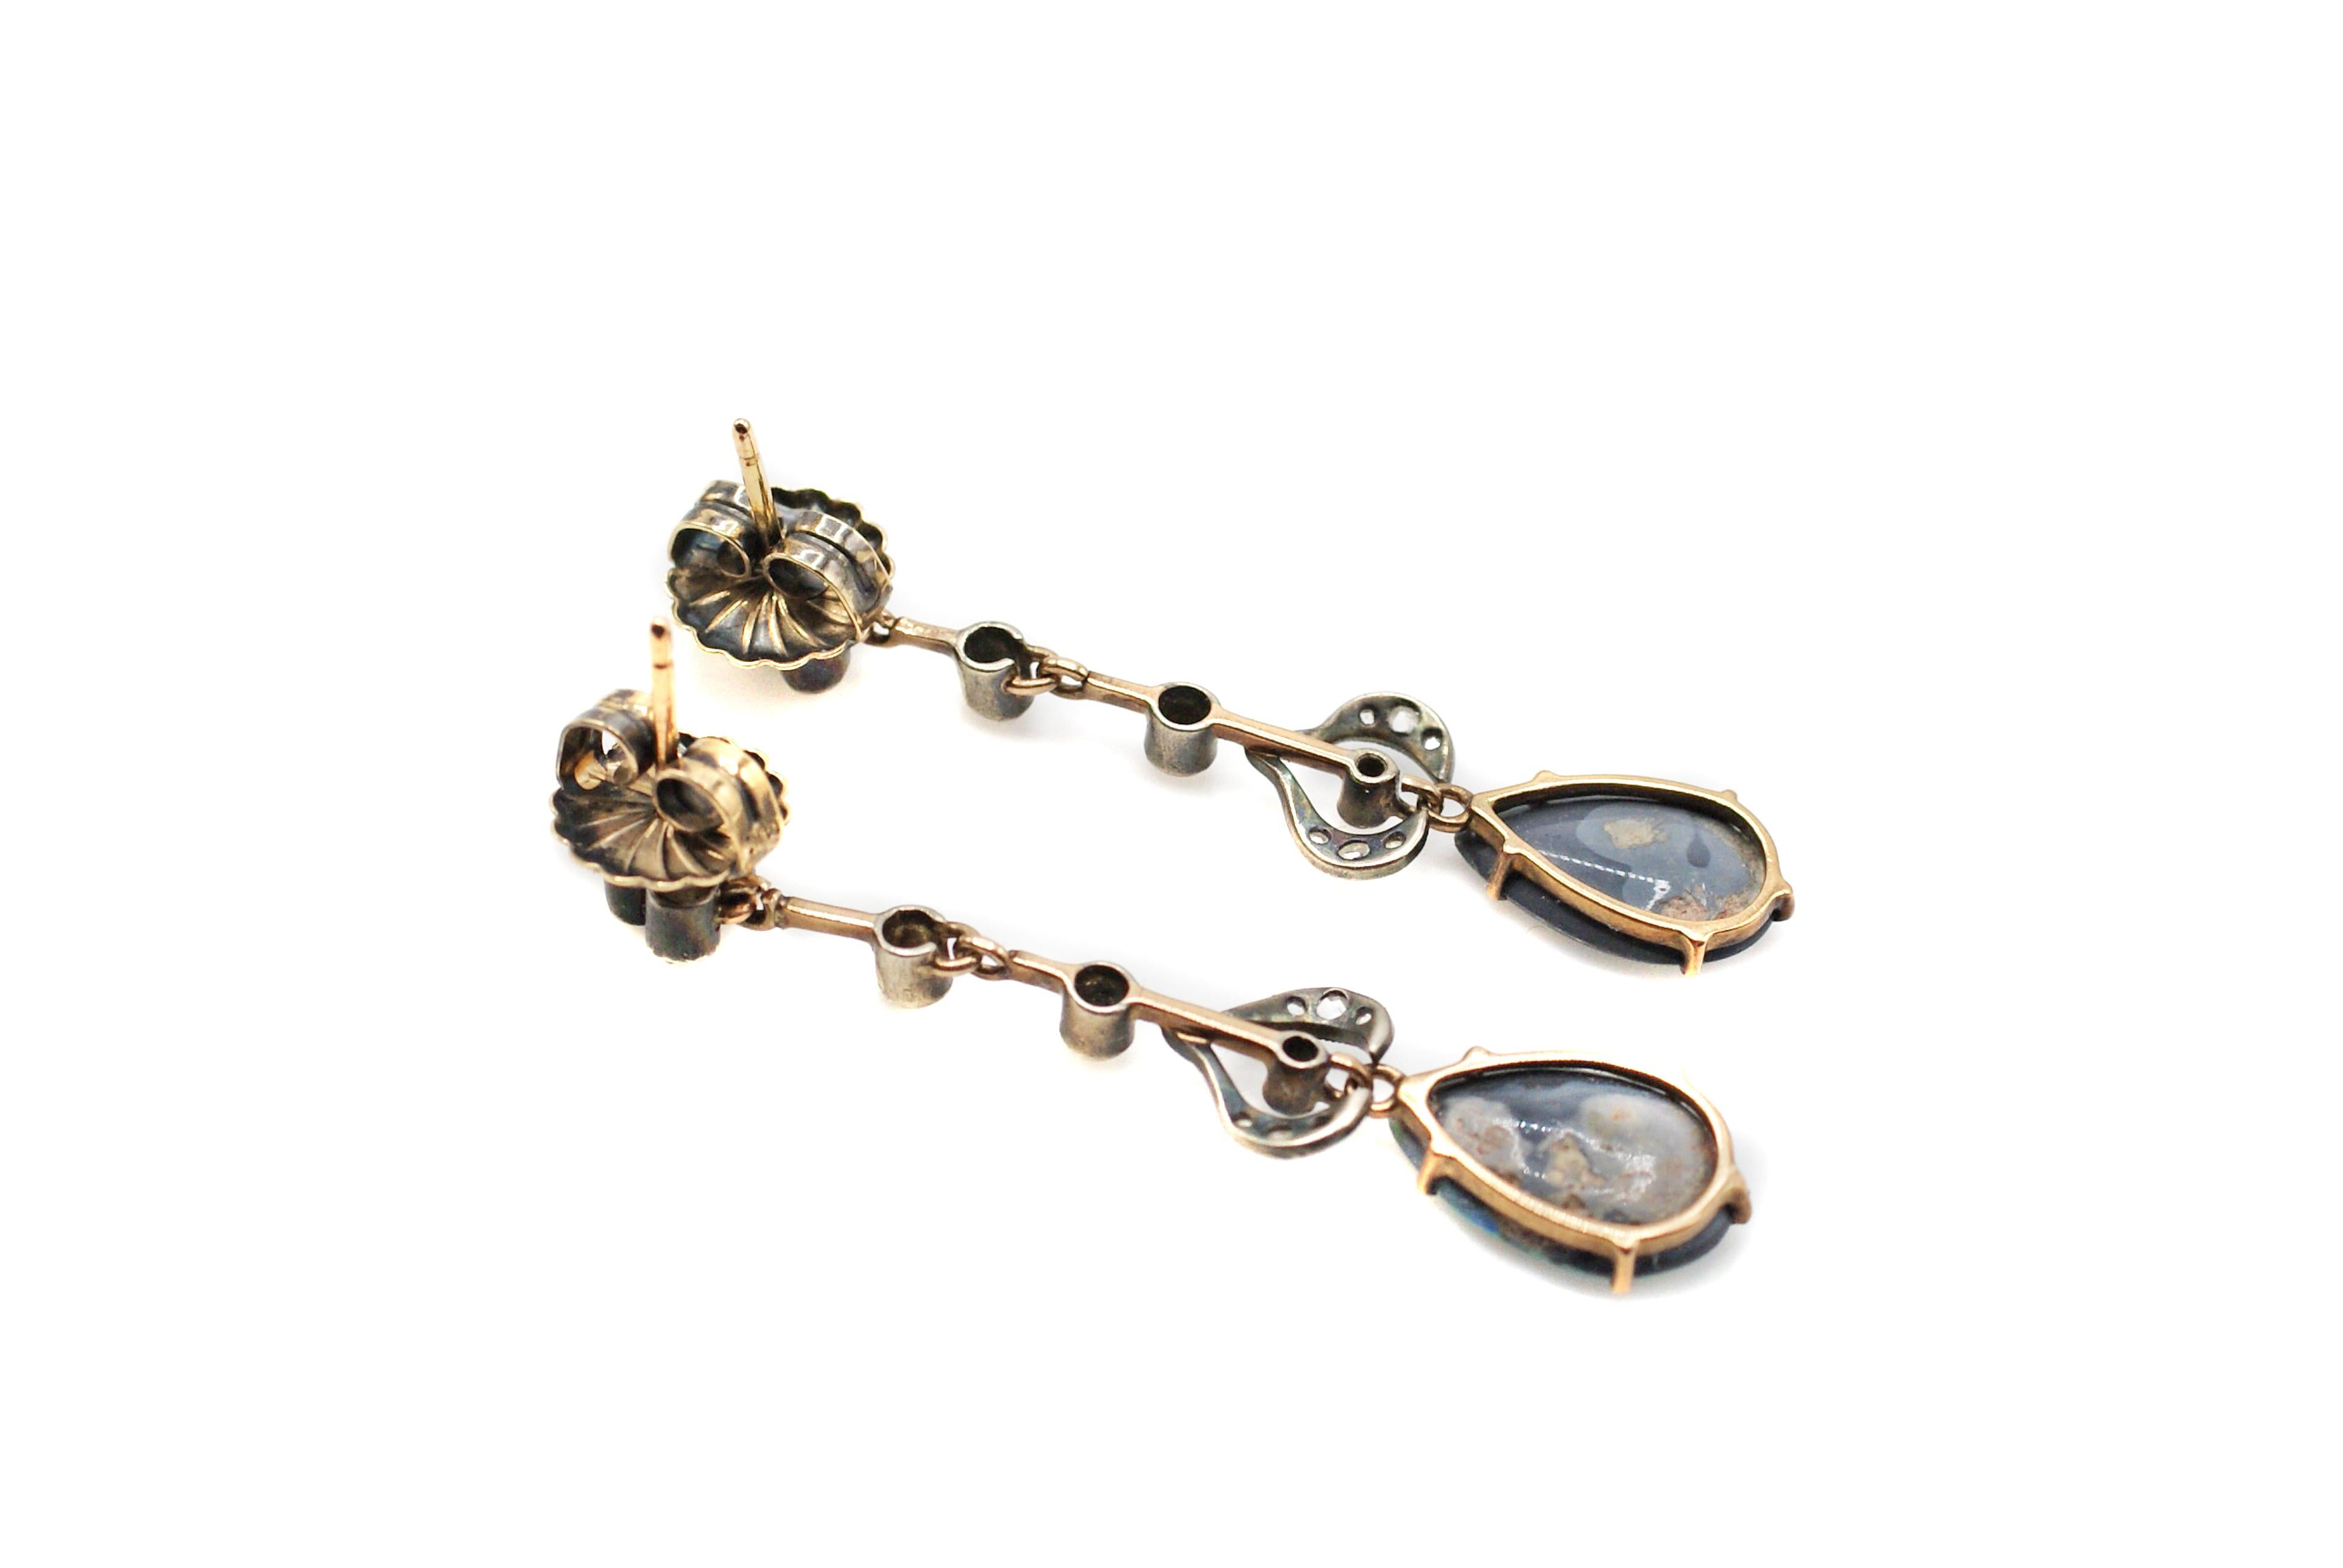 These unique Victorian earrings, handcrafted out of silver topped rose gold, are set with 2 pear shape extremely rare black opals, displaying all colors from blue, green, orange, and fiery red. The perfectly matched black opals, measured to weigh